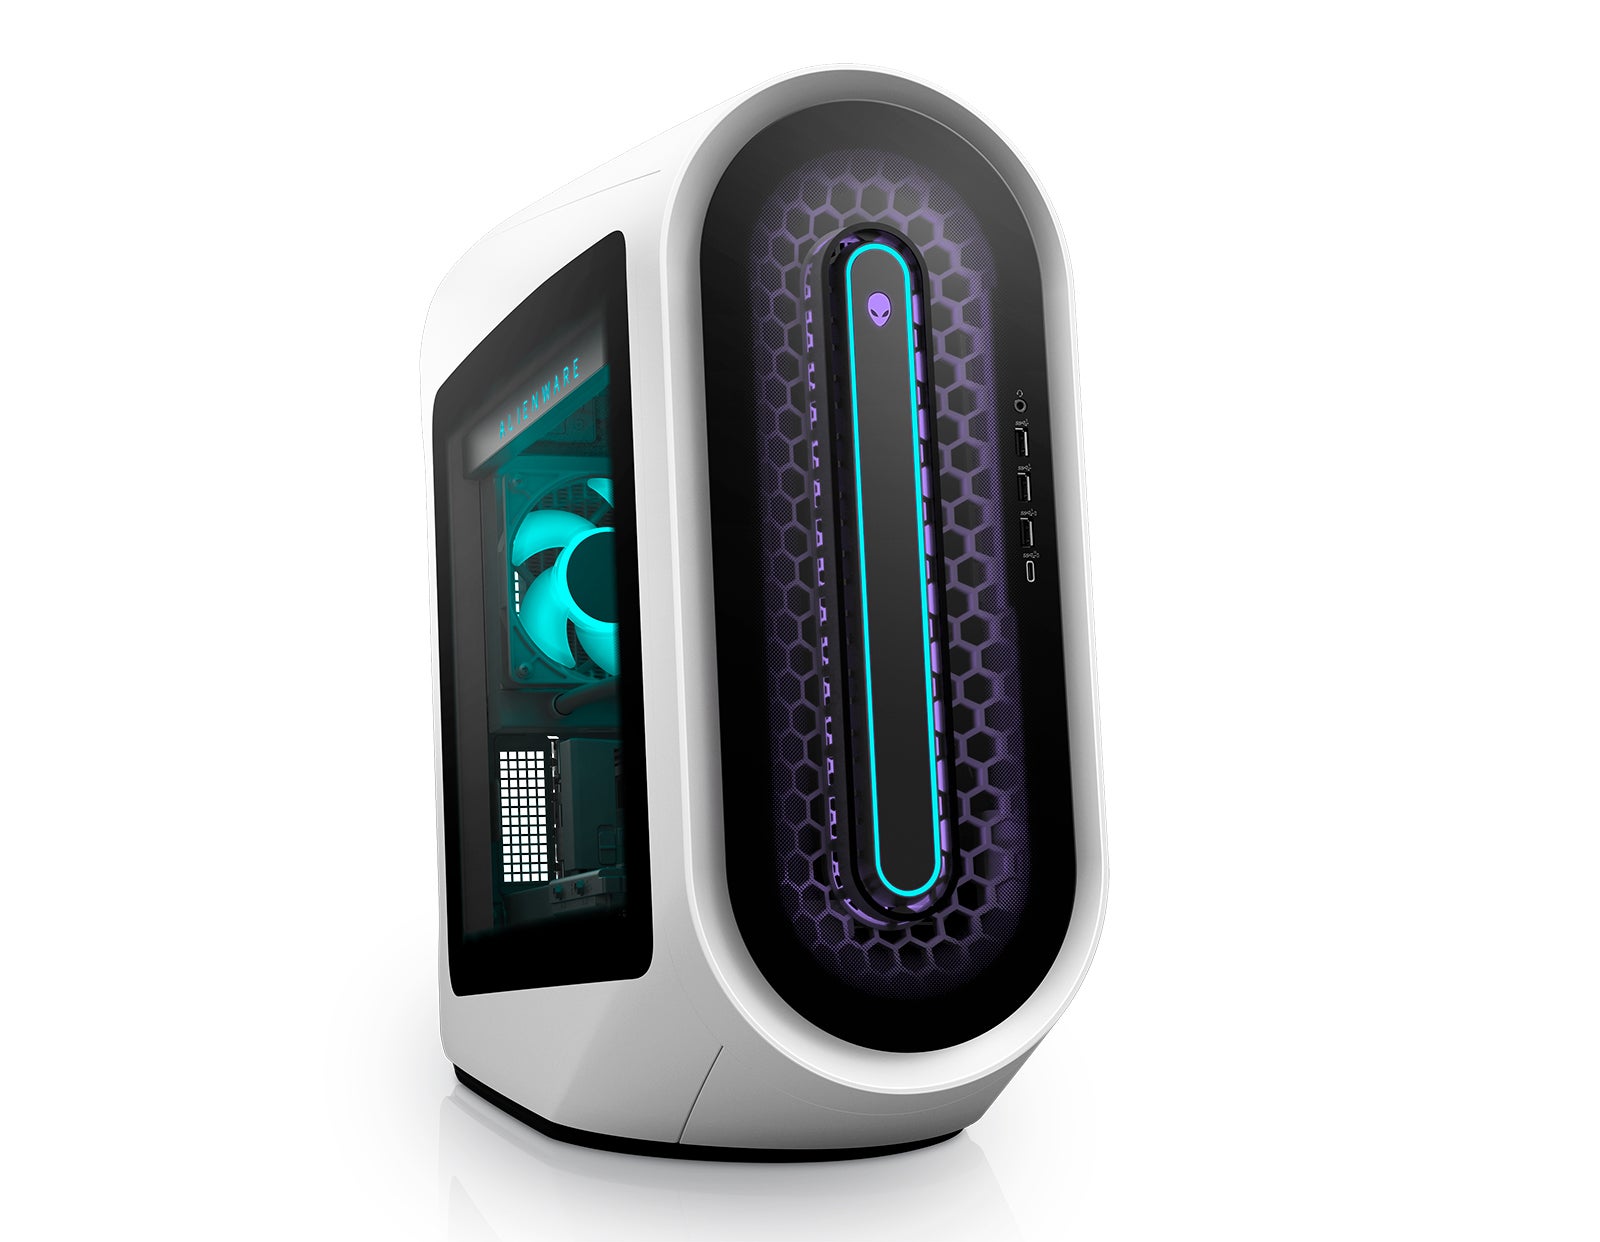 Detail of the new Alienware Aurora gaming PC design